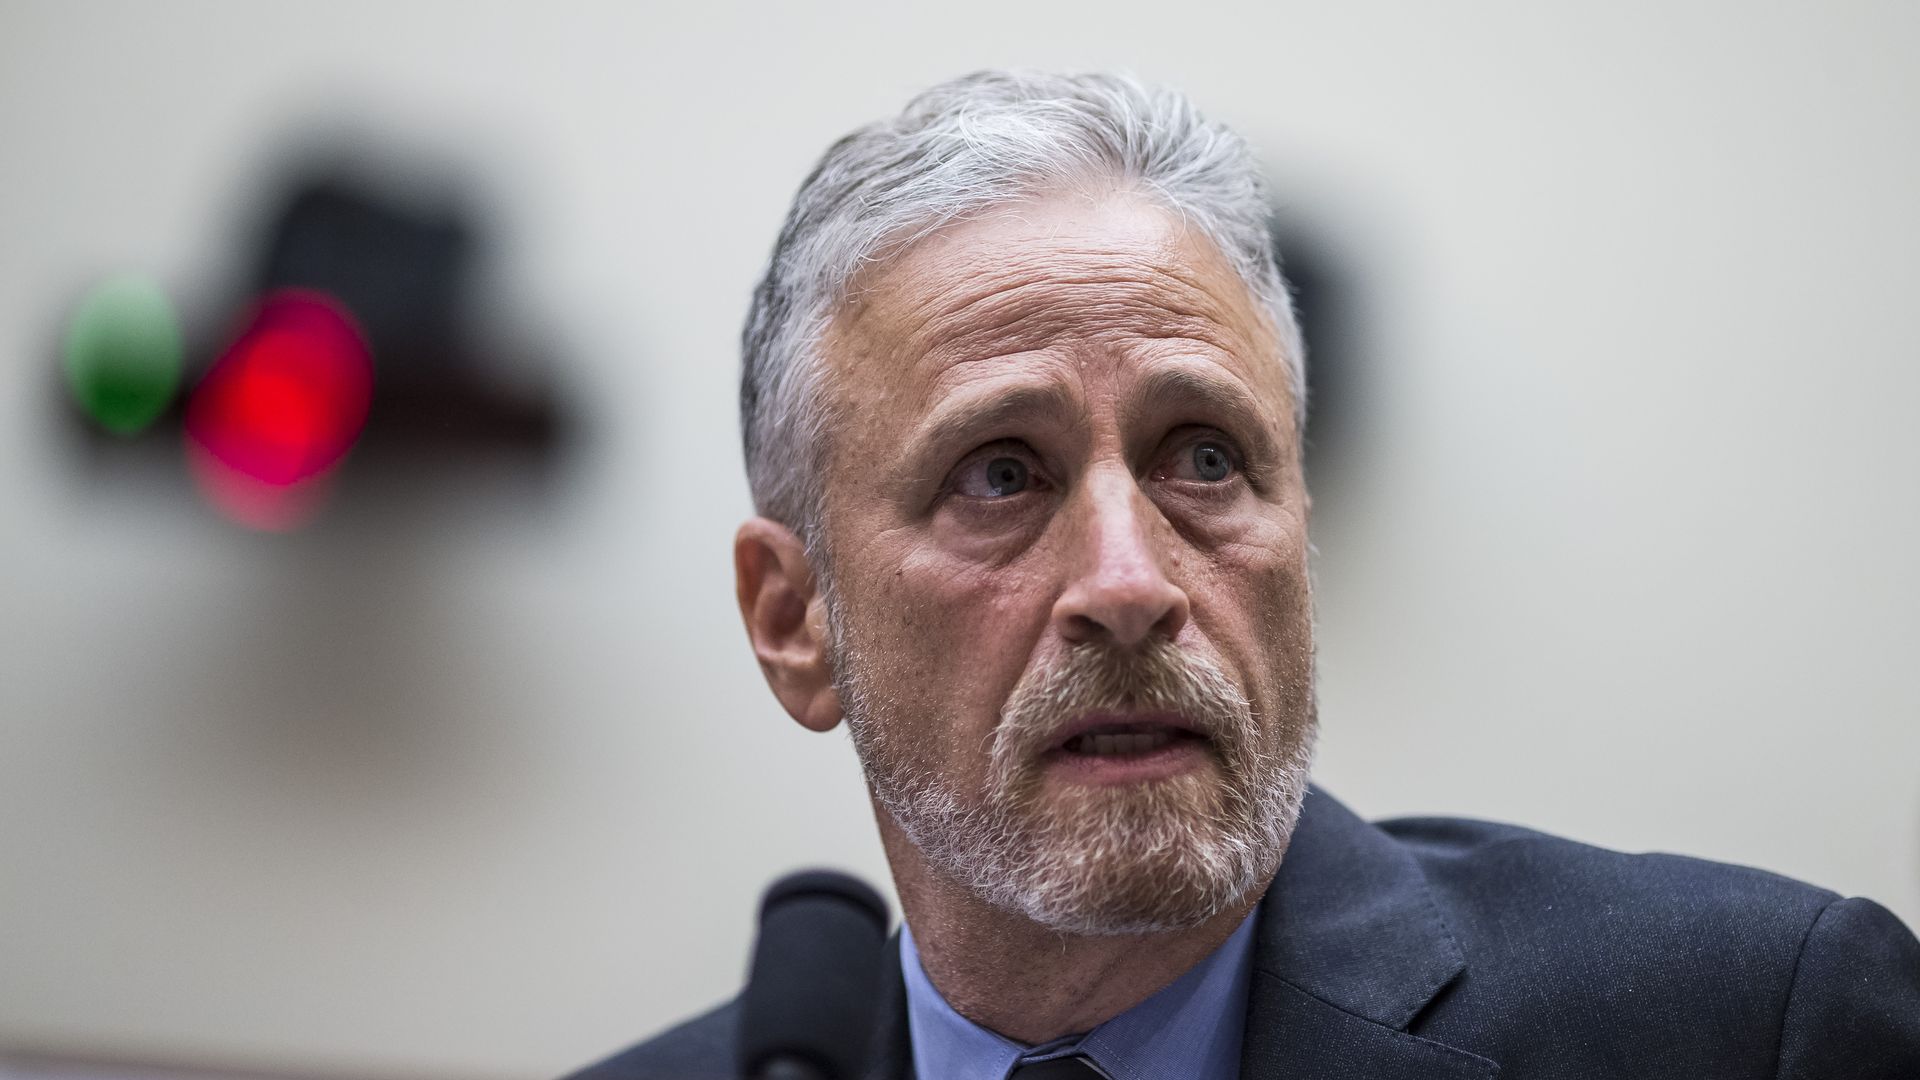  Former Daily Show Host Jon Stewart testifies during a House Judiciary Committee hearing on reauthorization of the September 11th Victim Compensation Fund on Capitol Hill on June 11.